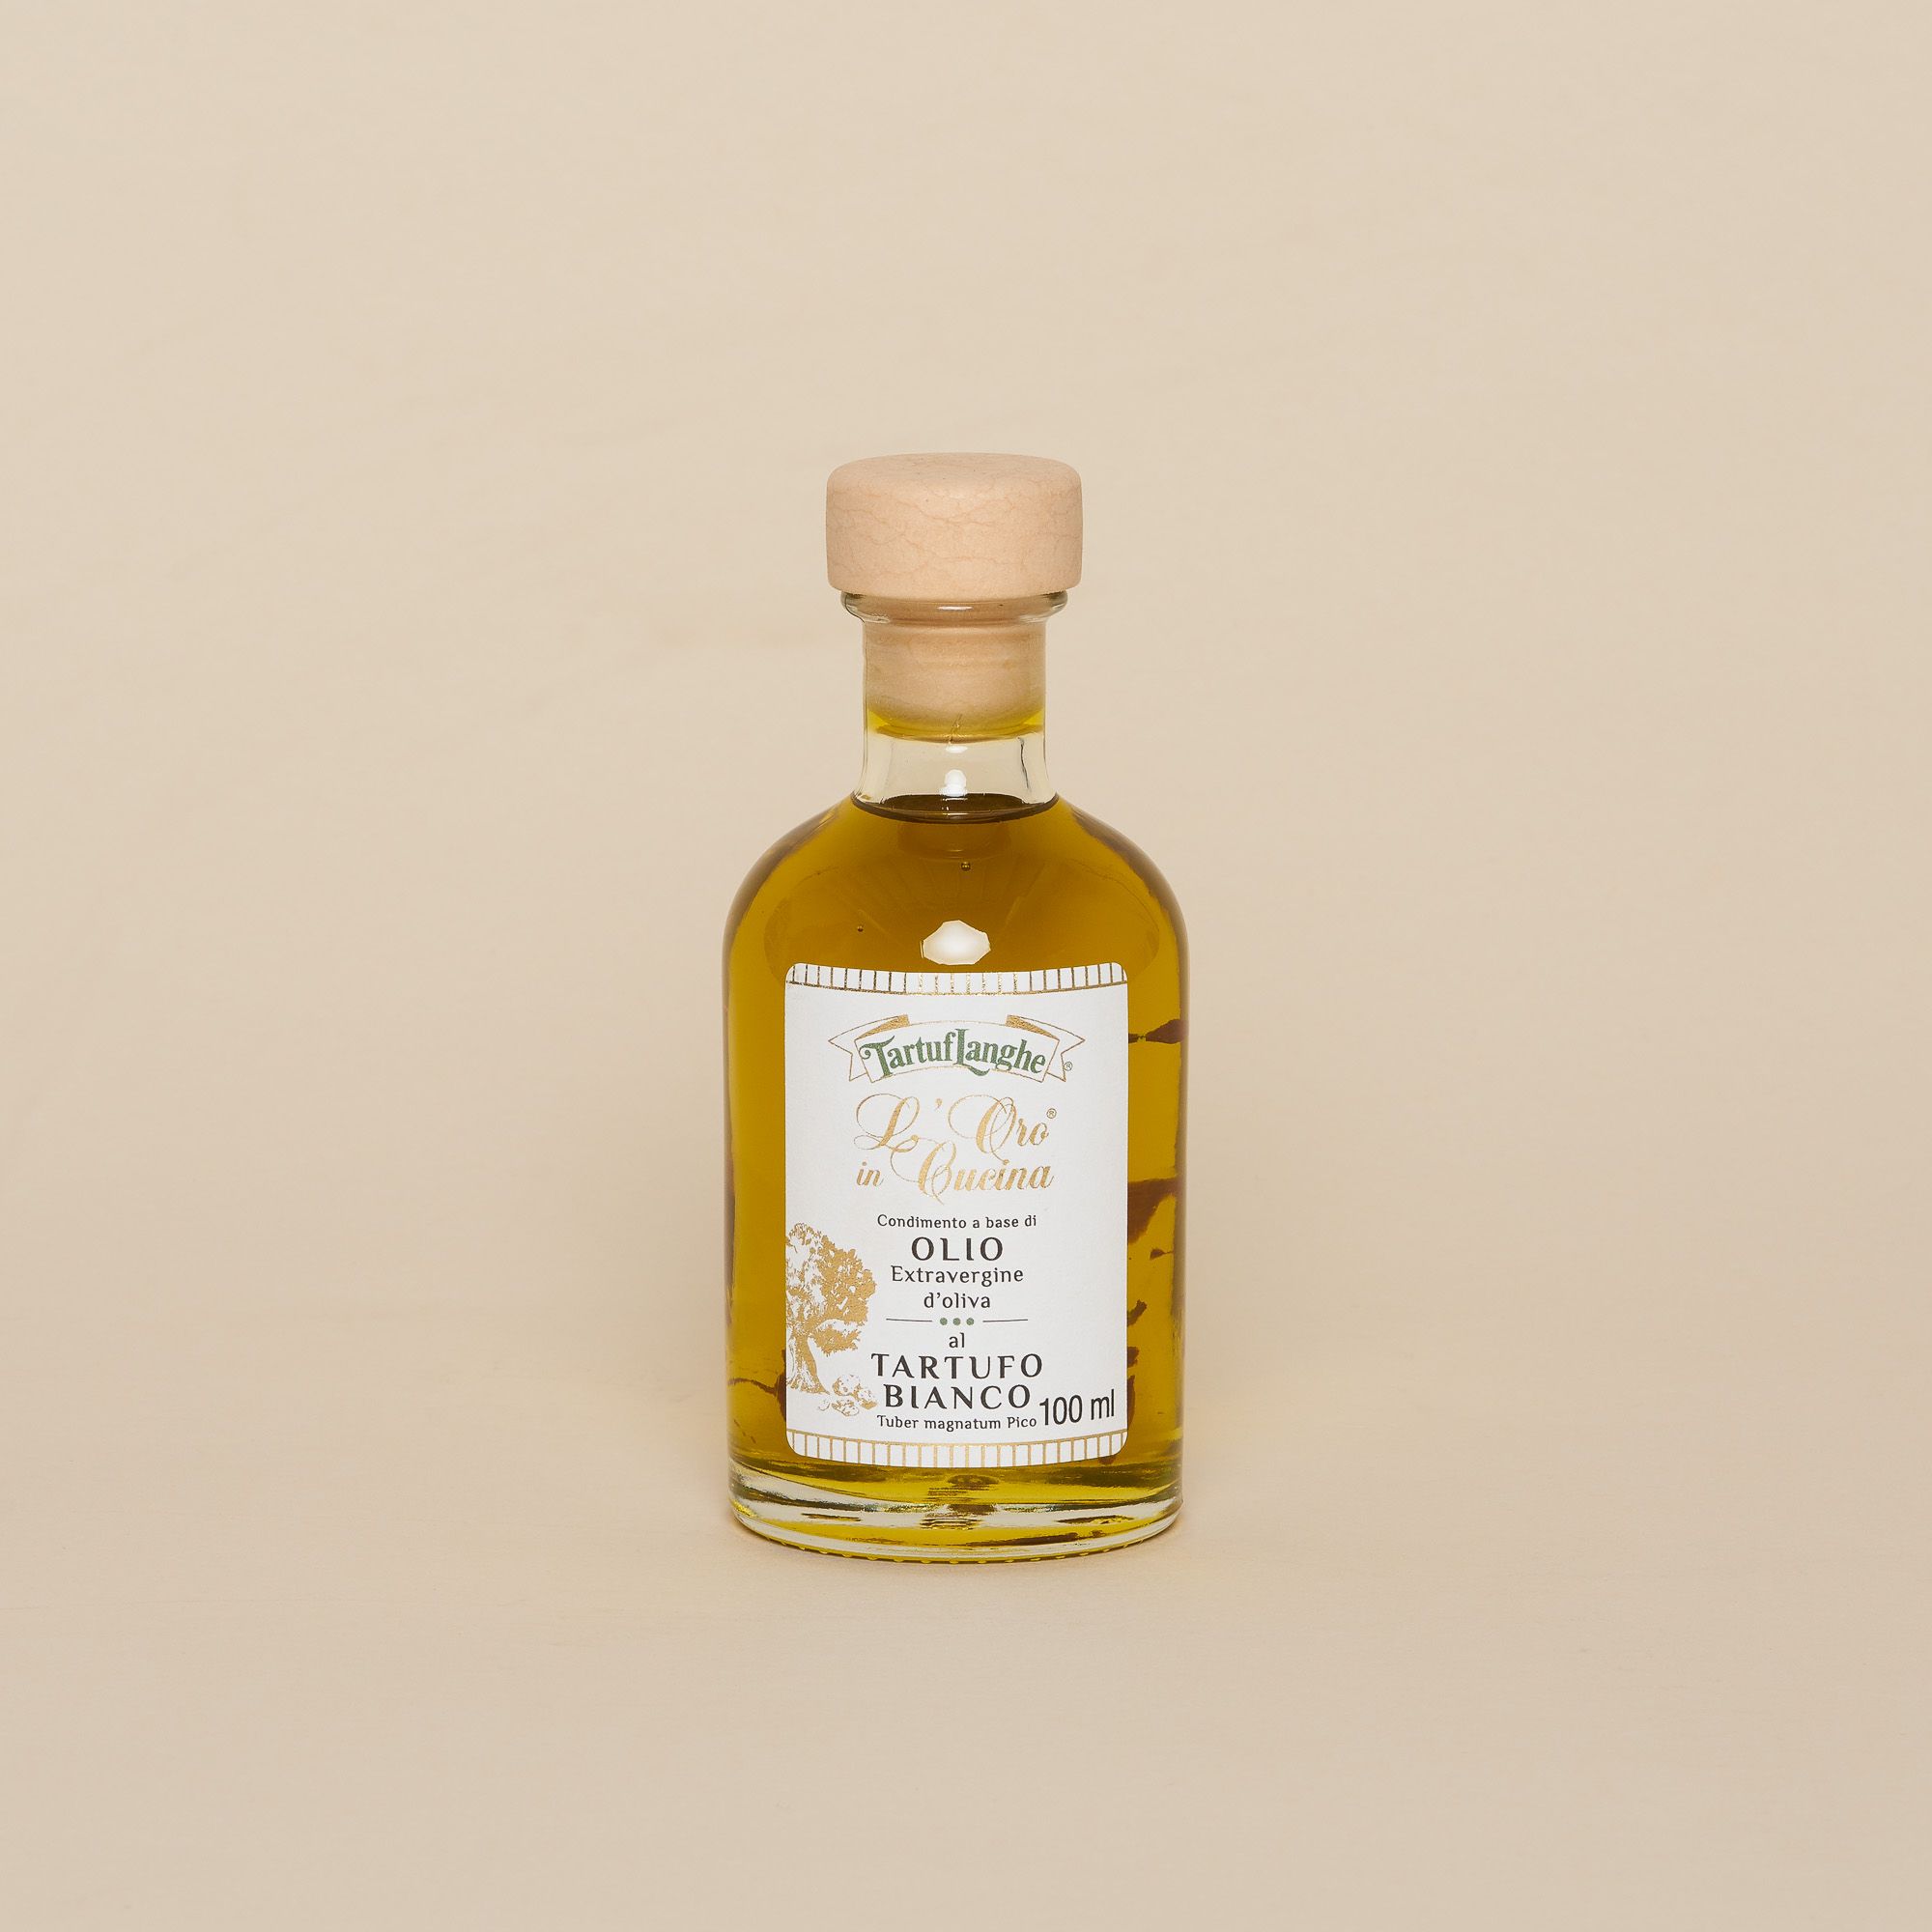 A small glass bottle of olive oil with a cork top. Tiny, the bottom sits comfortably in the palm of your hand. The label white, gold, green and done in a classic style.